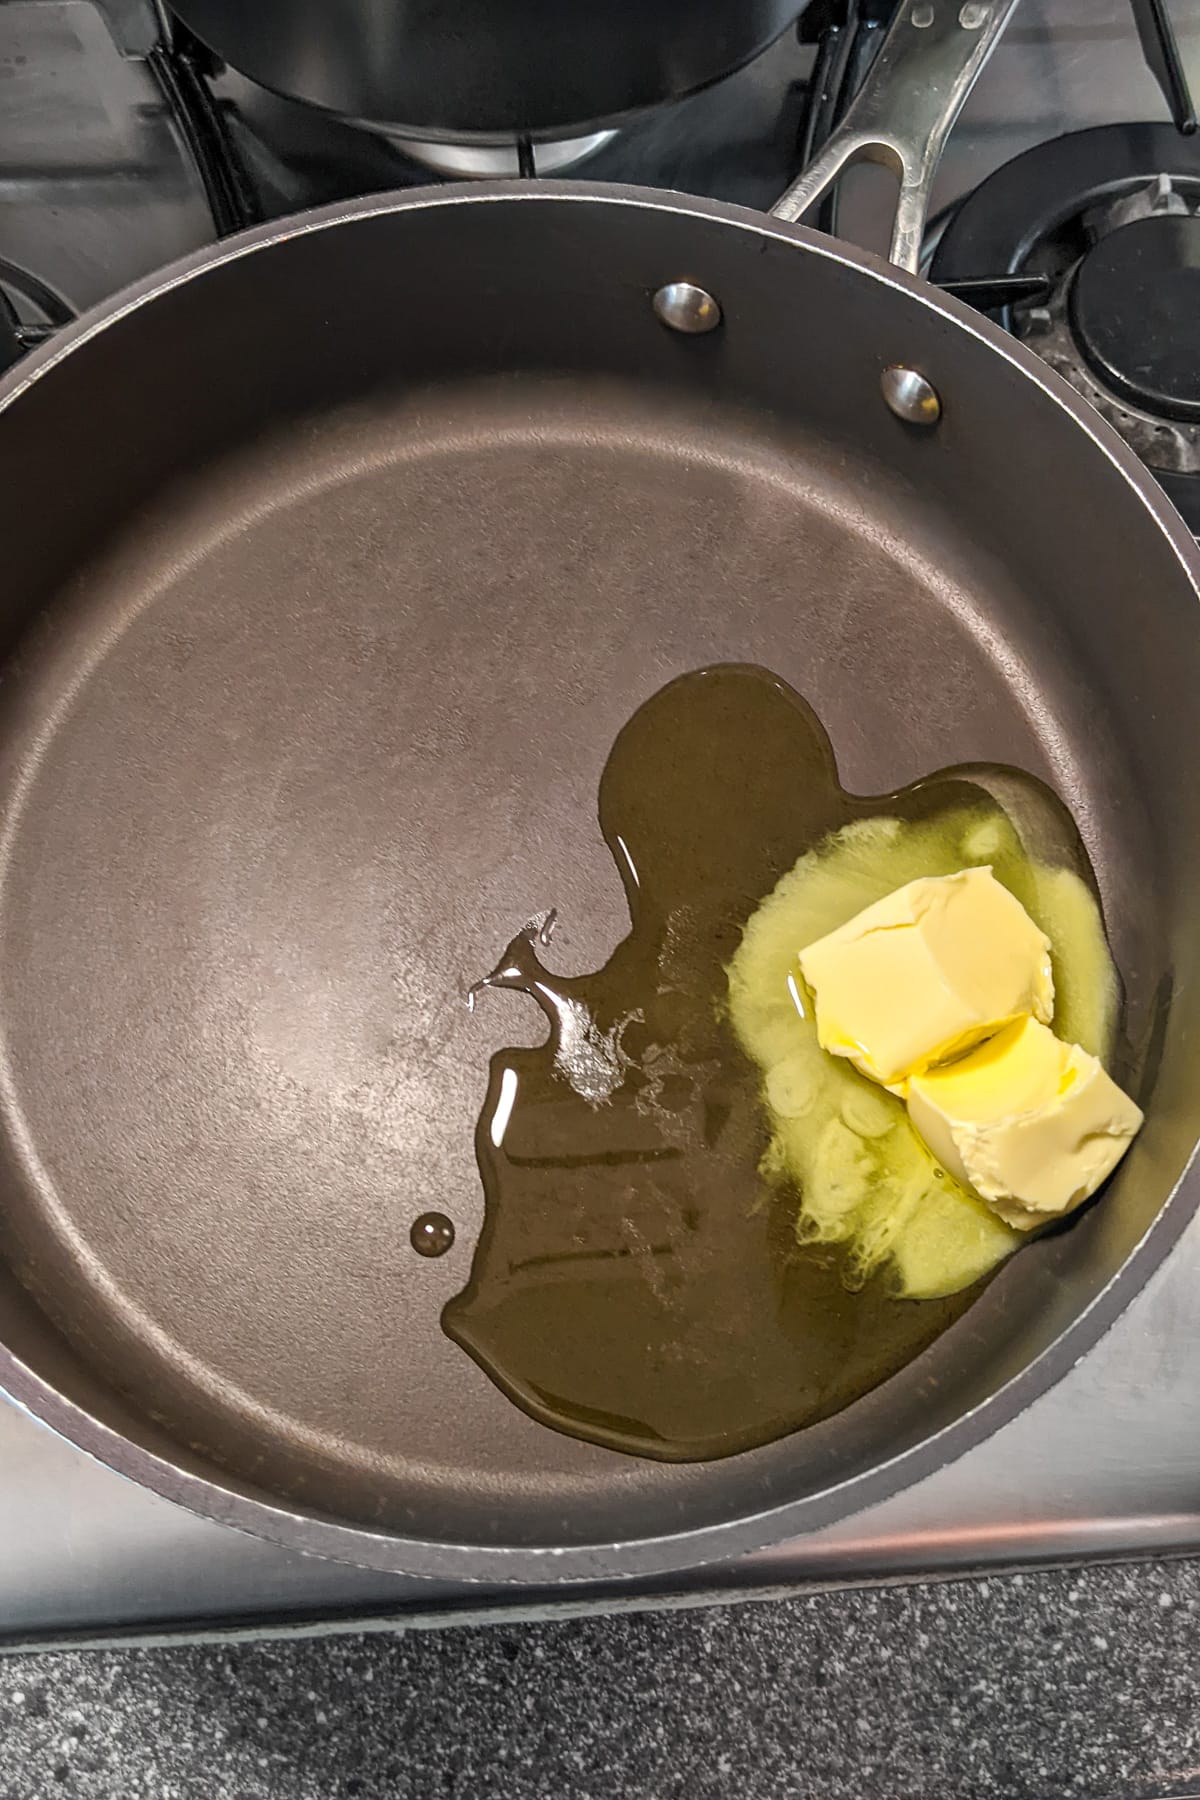 Melting butter in a frying pan on a stove.